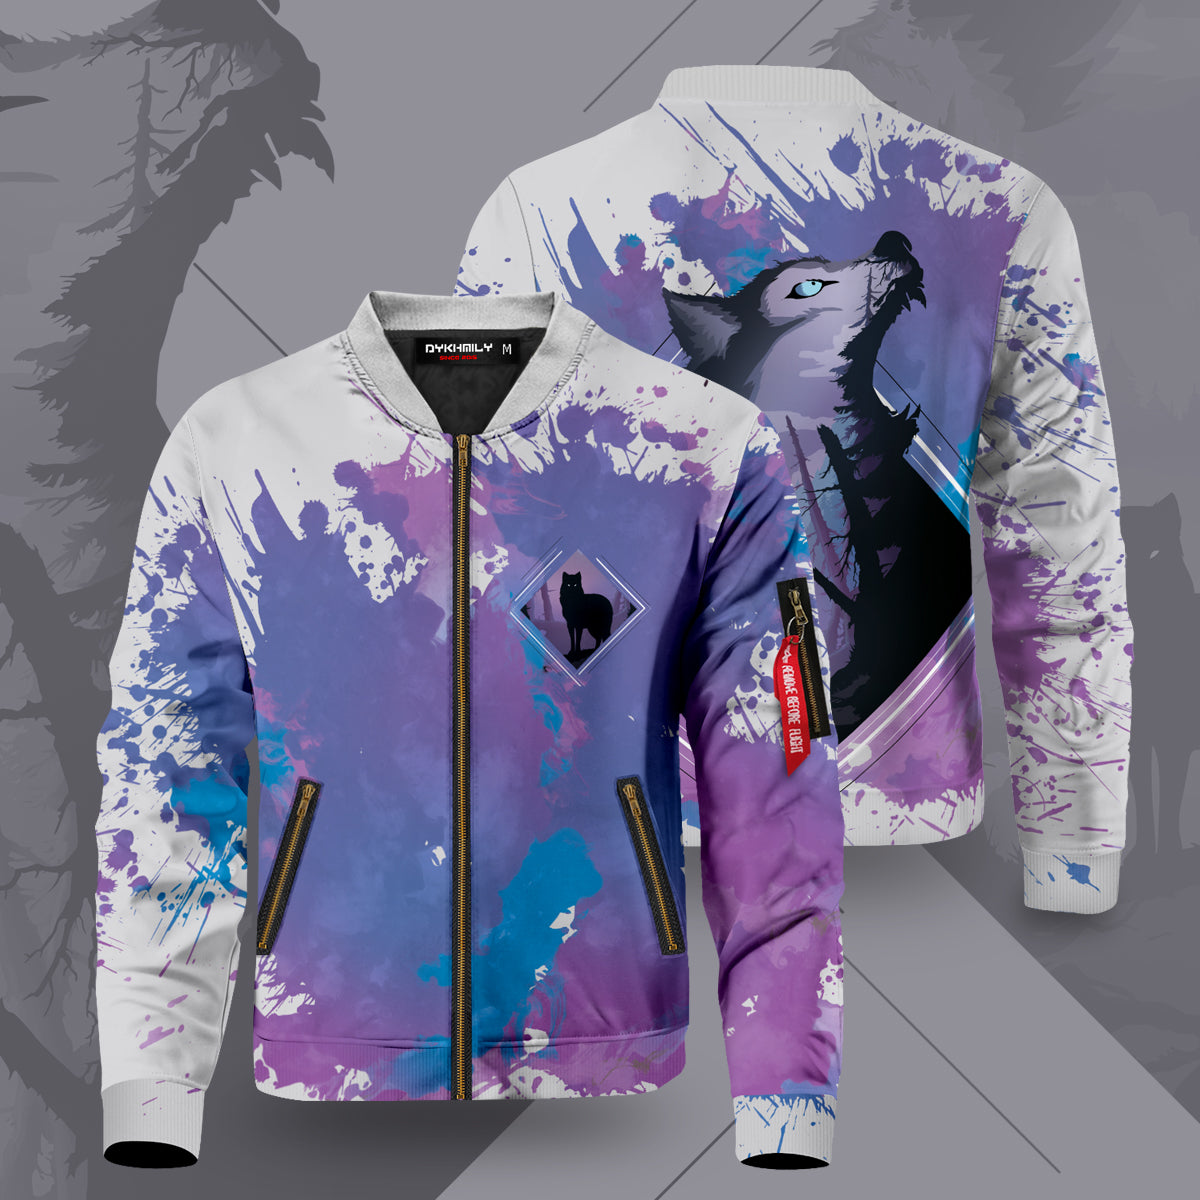 Into the Woods Bomber Jacket